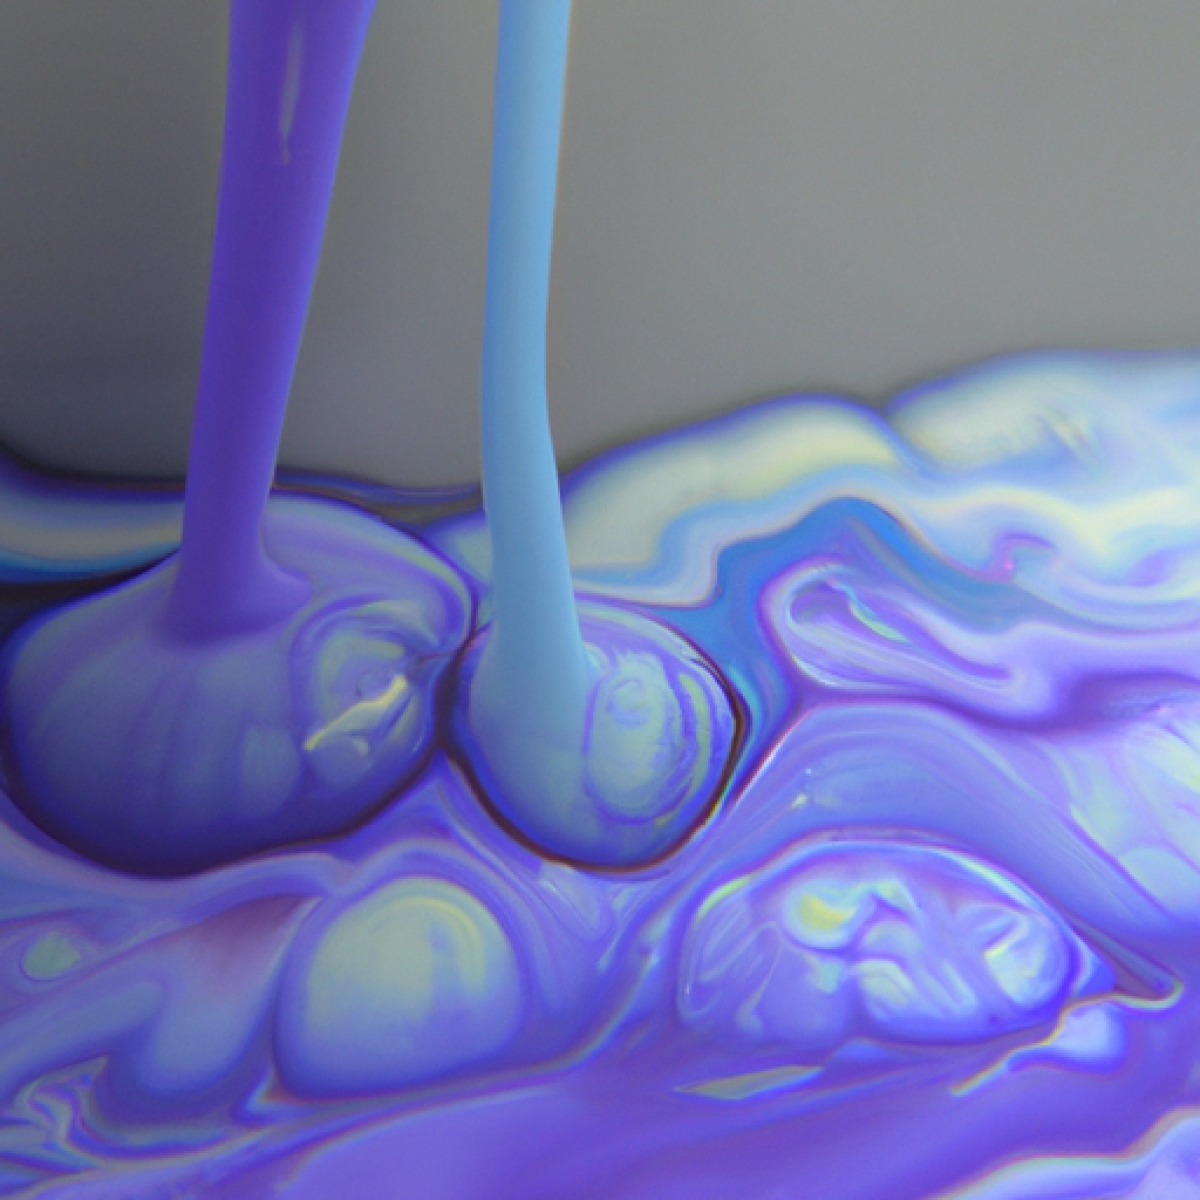 A detail image related to the topic: Pintura liquida